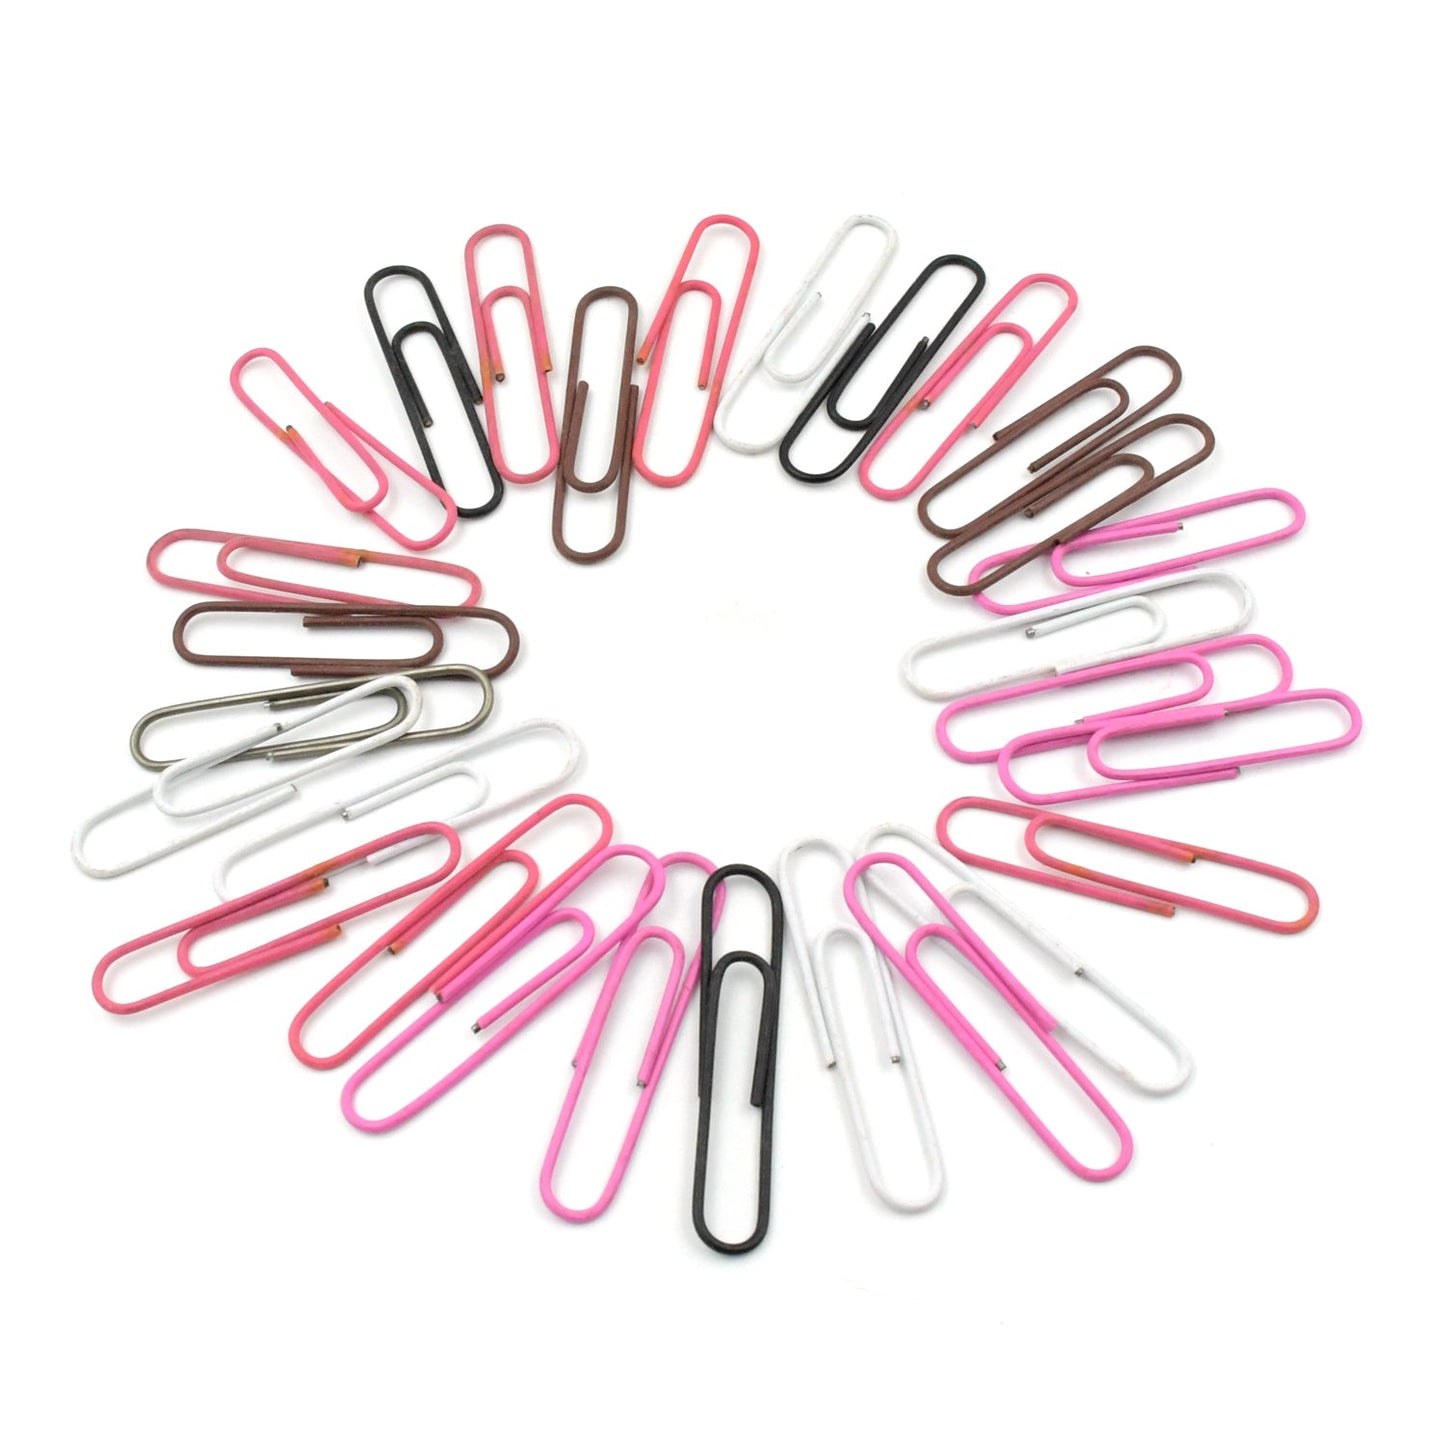 8859 MultiPurpose Assorted Color Coated Paper Clips, Assorted Sizes, Durable & Rustproof, Colored Paper Clips for Paperwork, DIY Work, classify Documents, Bookmark, Snacks Bag Clips, Suitable for Home, School, Office (Approx 28 Pcs) - deal99.in